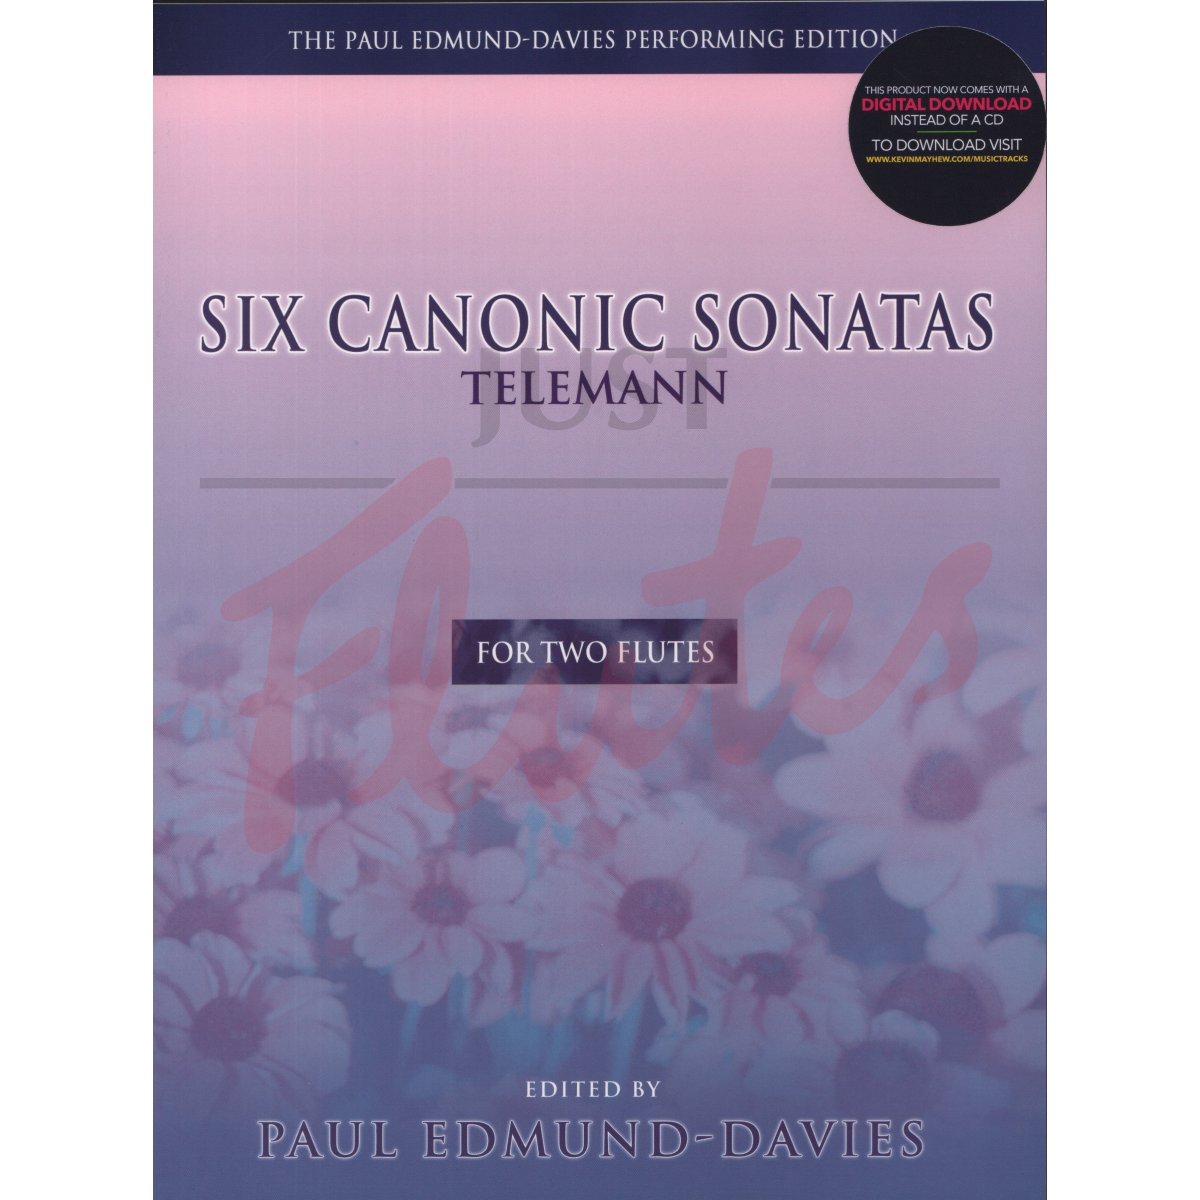 Six Canonic Sonatas for Two Flutes